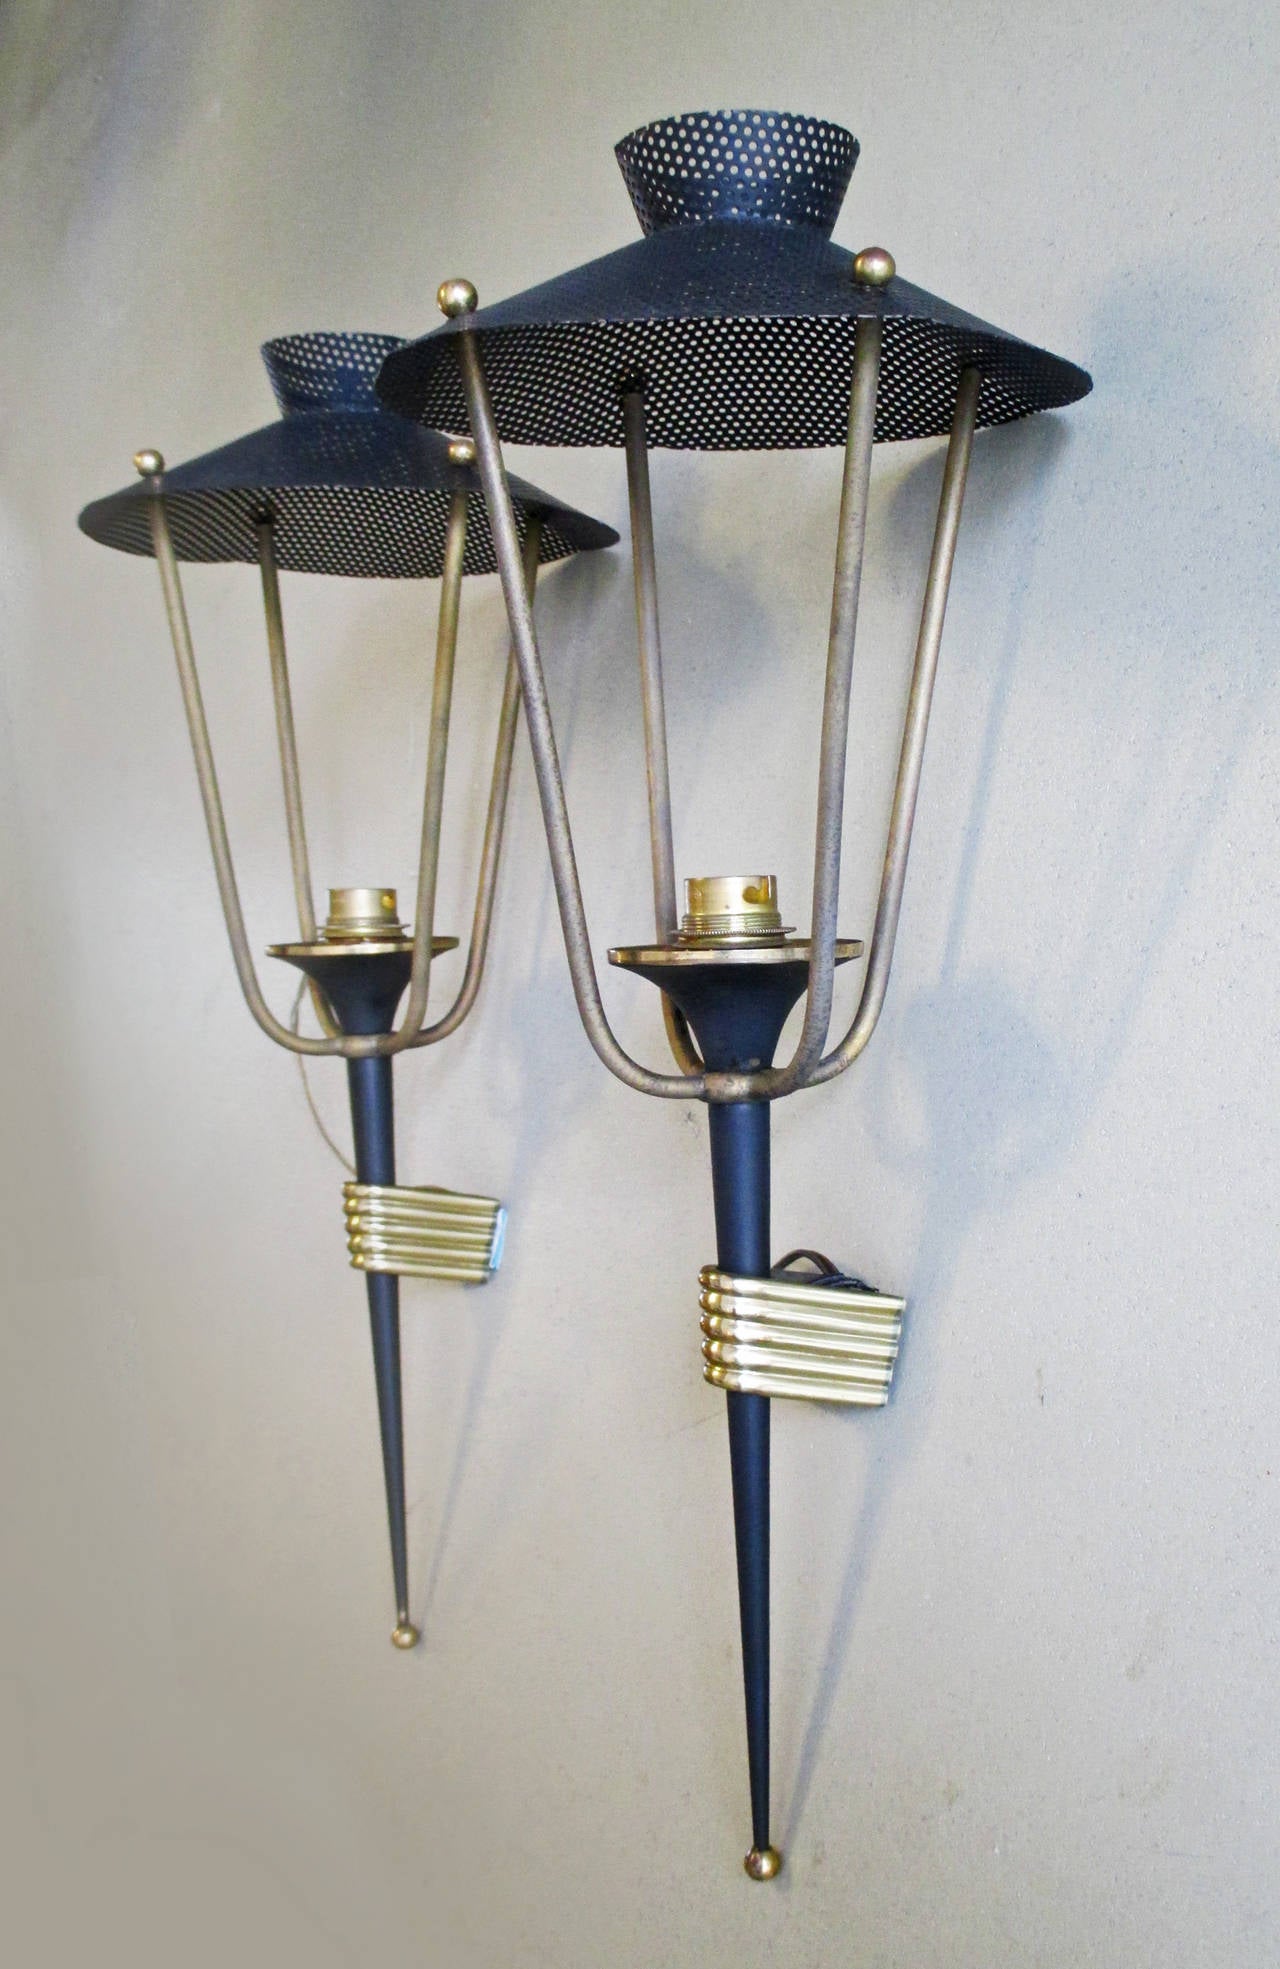 Three Maison Arlus Sconces, made in France 1950's.
Price is per piece.